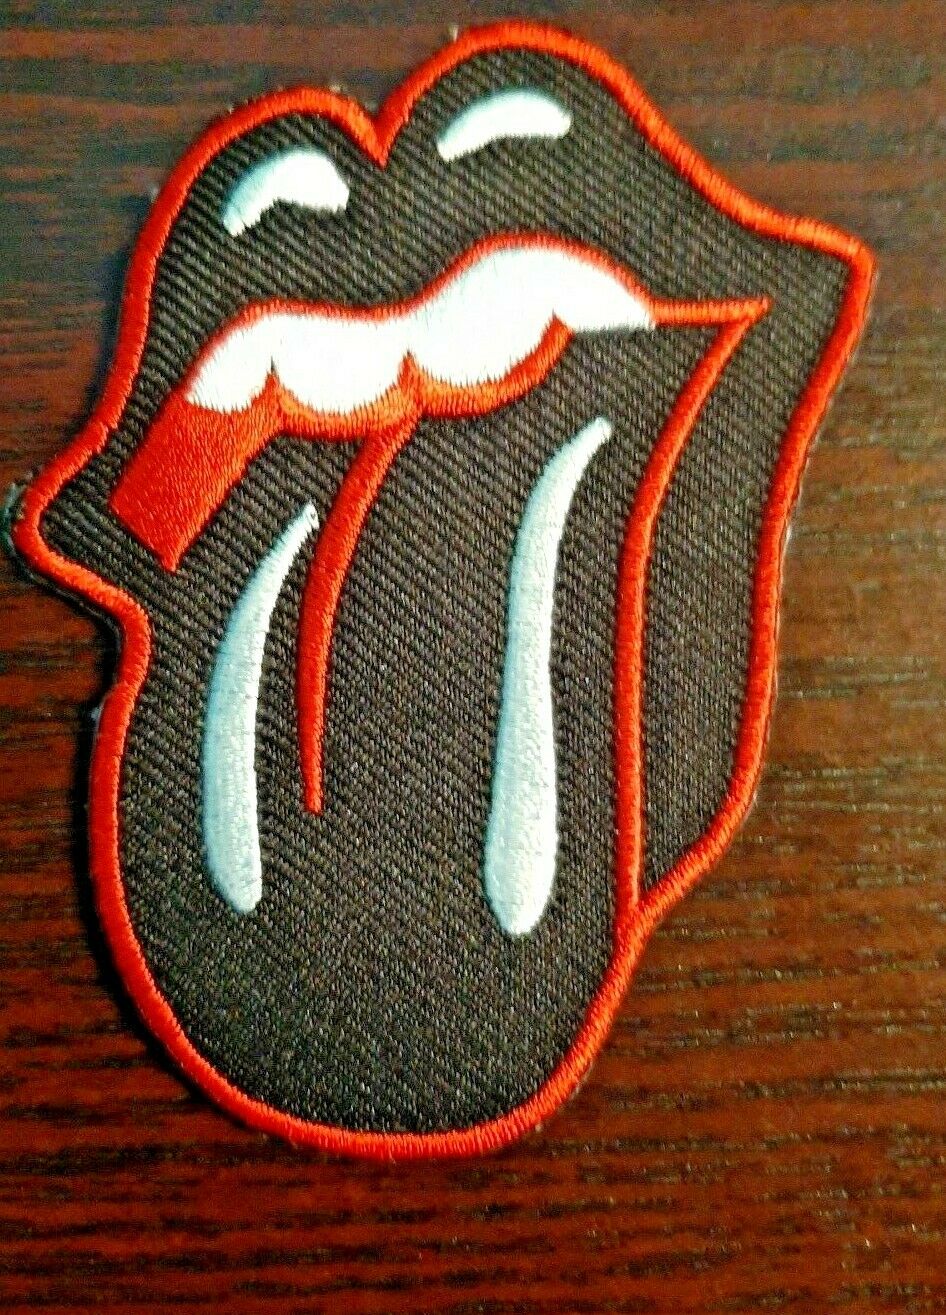 Rolling Stone Tongue Embroidered Iron-on Patch 3.5" X 2.5"  (new)